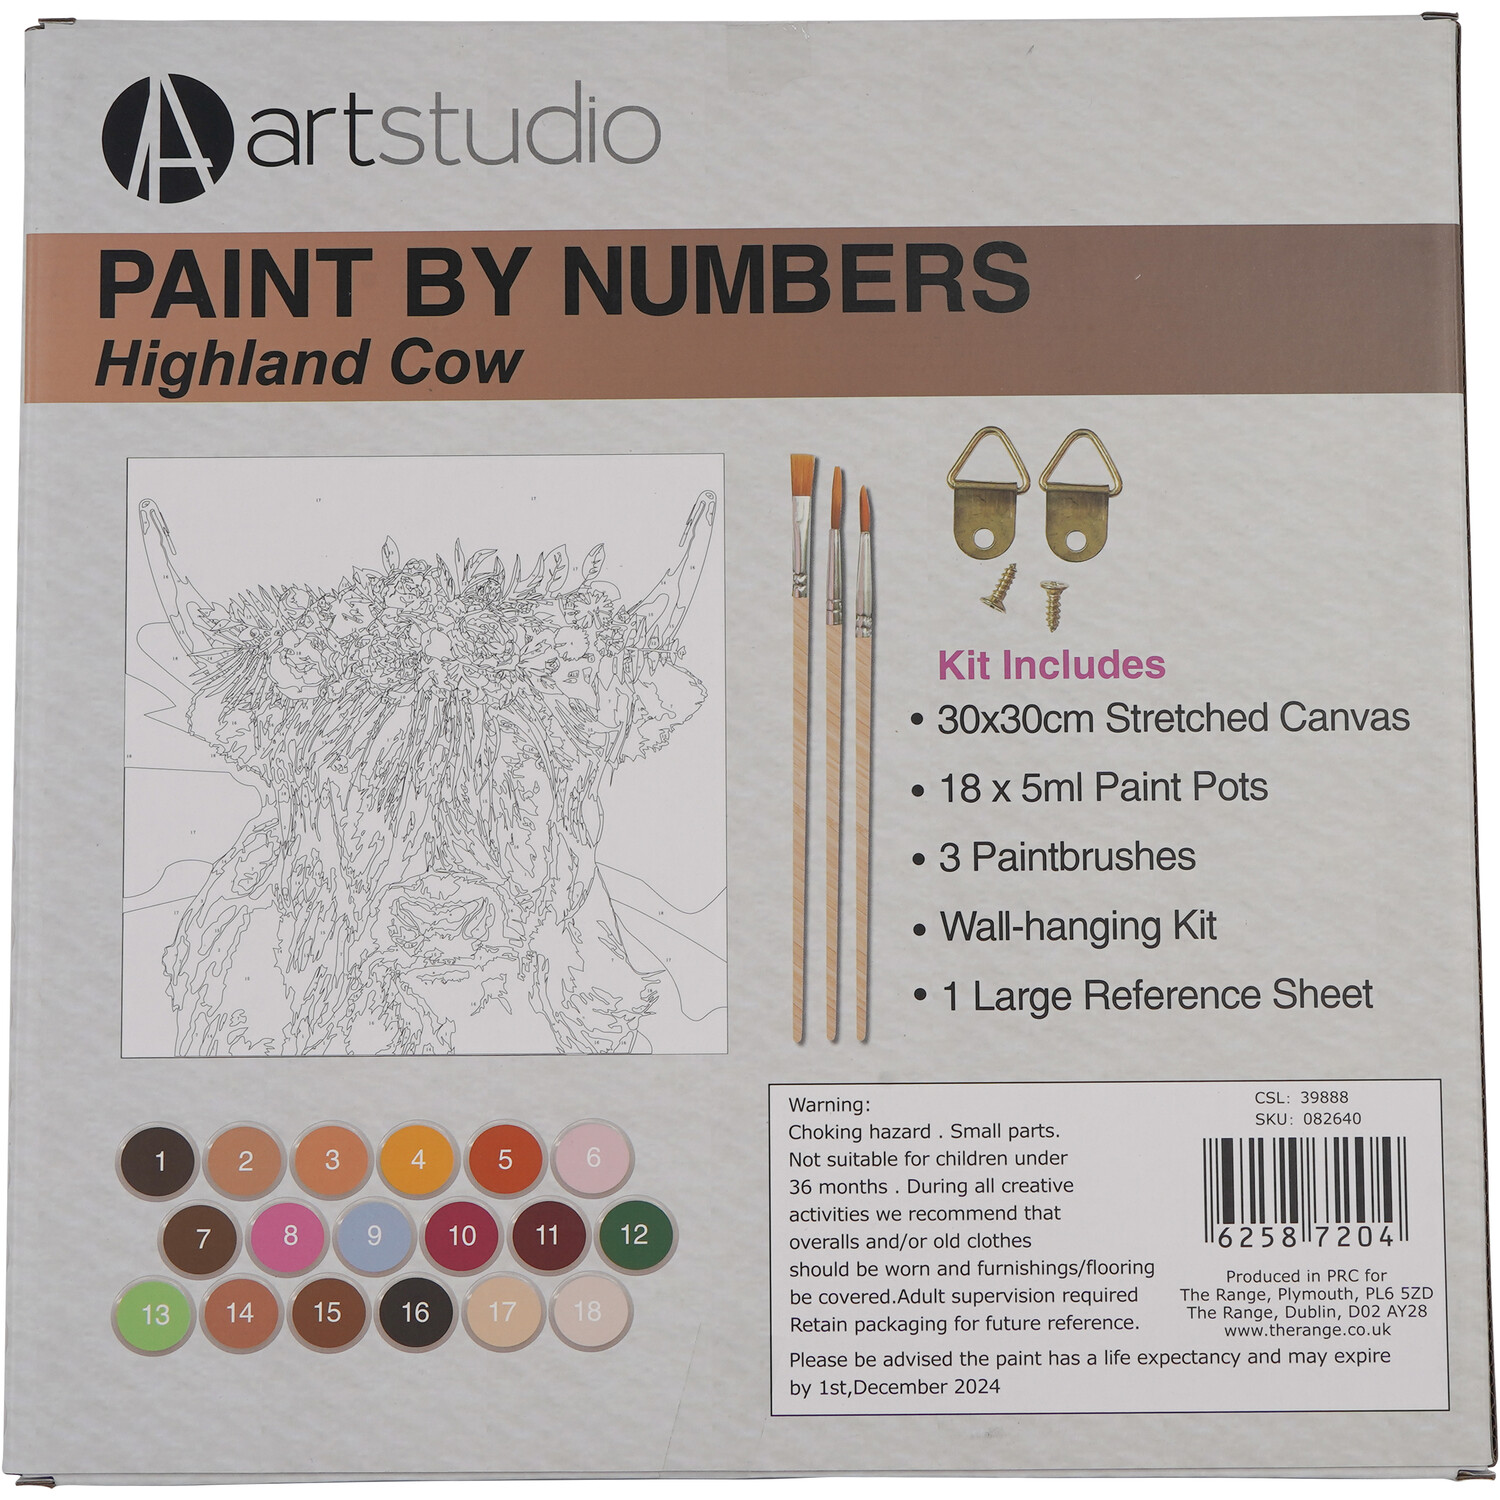 Art Studio Paint Your Own Highland Cow Kit Image 3